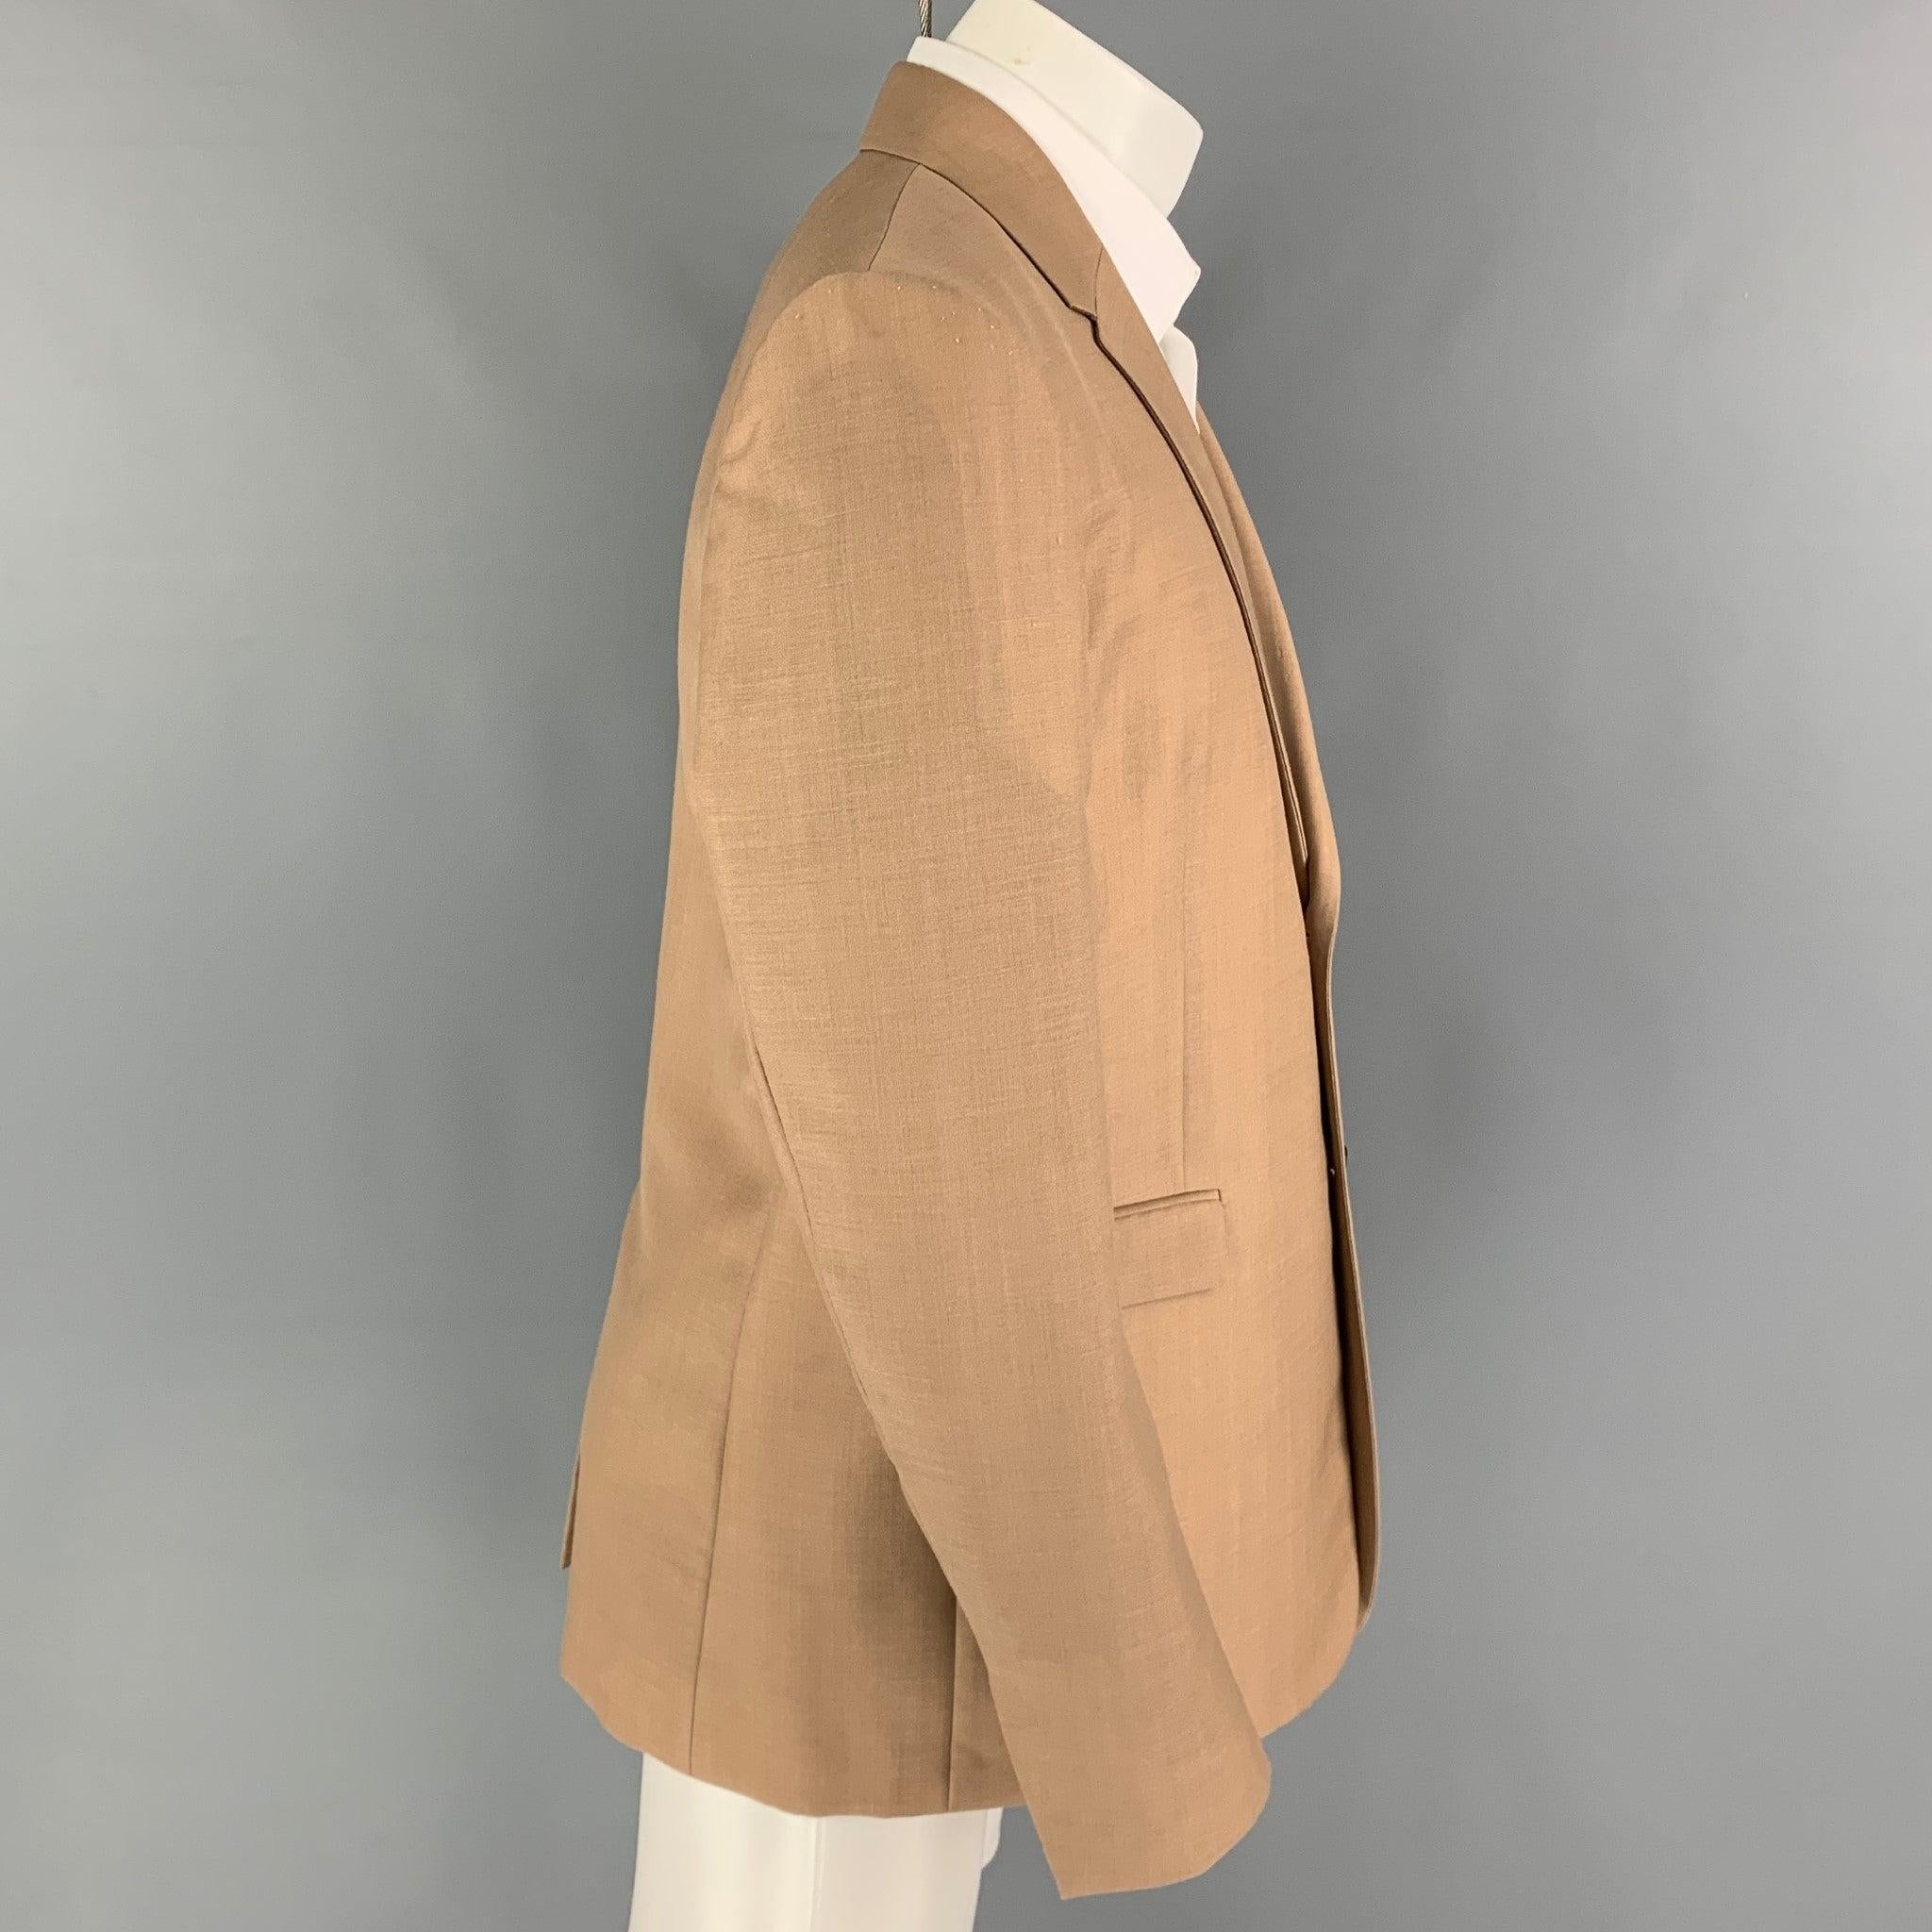 BOTTEGA VENETA Pre-Fall 2019 sport coat comes in a khaki mohair / wool with a full liner featuring a notch lapel, flap pockets, single back vent, and a double button closure. Made in Italy.
Excellent
Pre-Owned Condition. 

Marked:   50